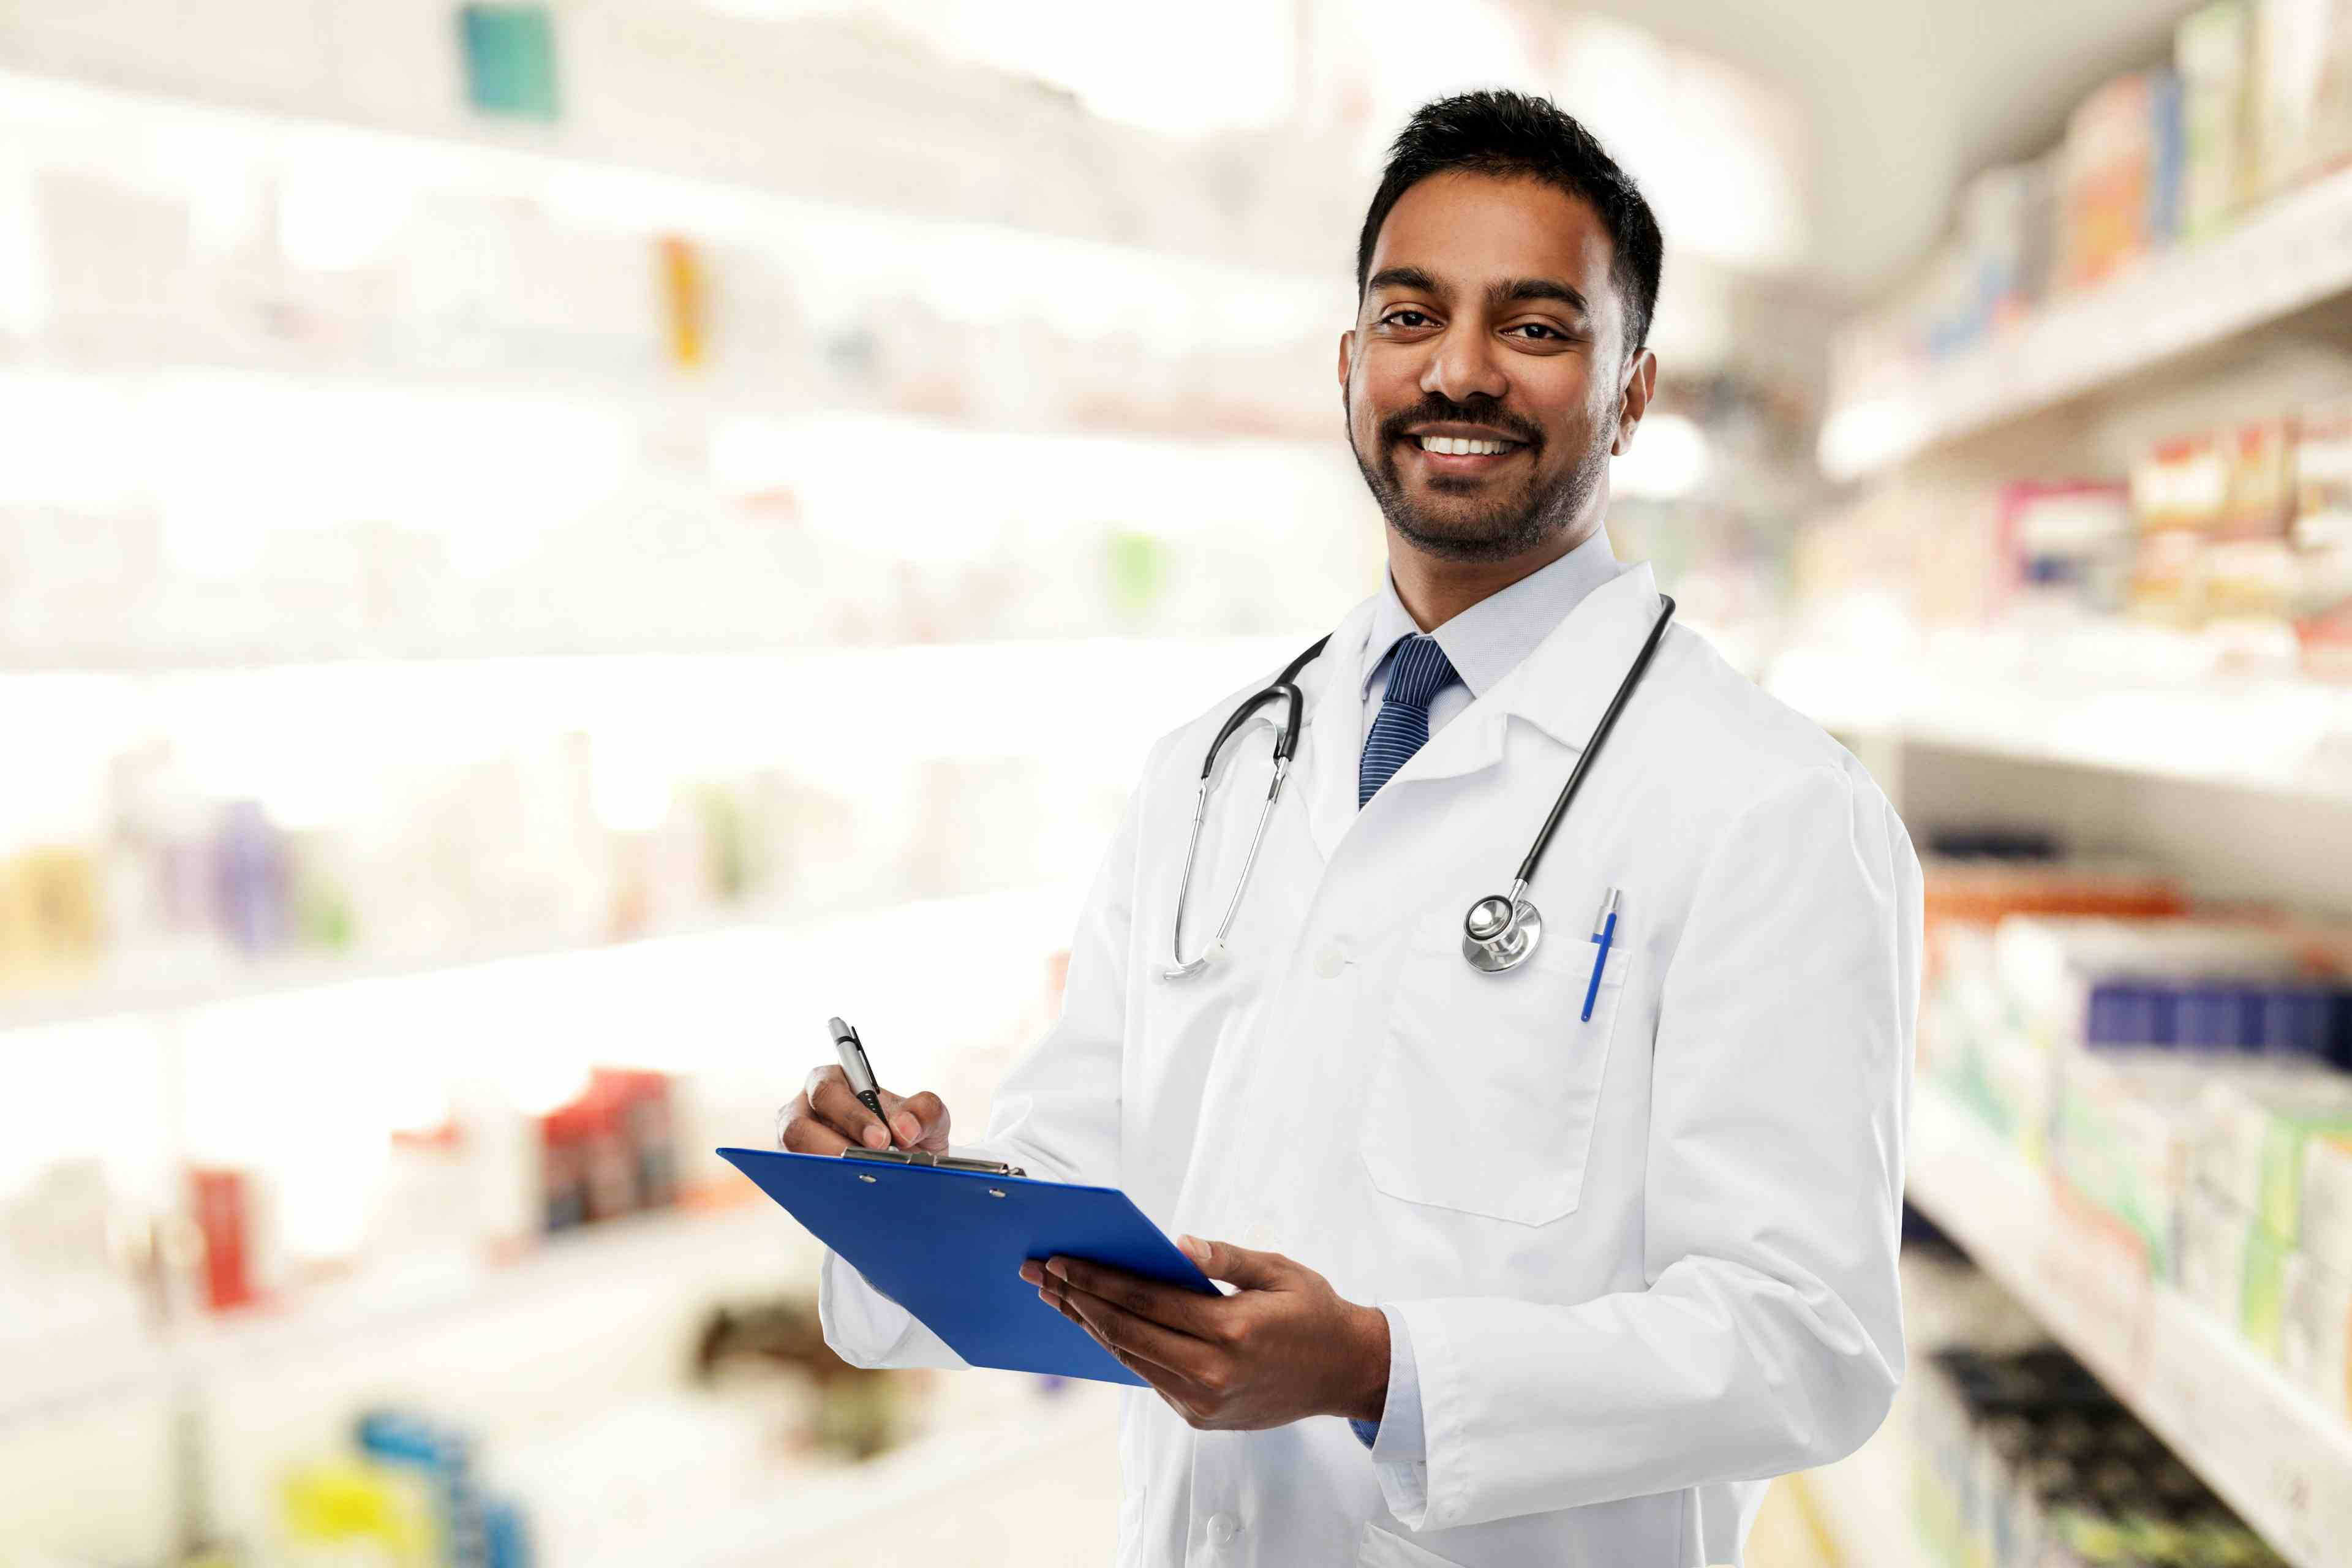 Male pharmacist in white coat with stethoscope and clipboard over drugstore background | Image Credit: Syda Productions - stock.adobe.com